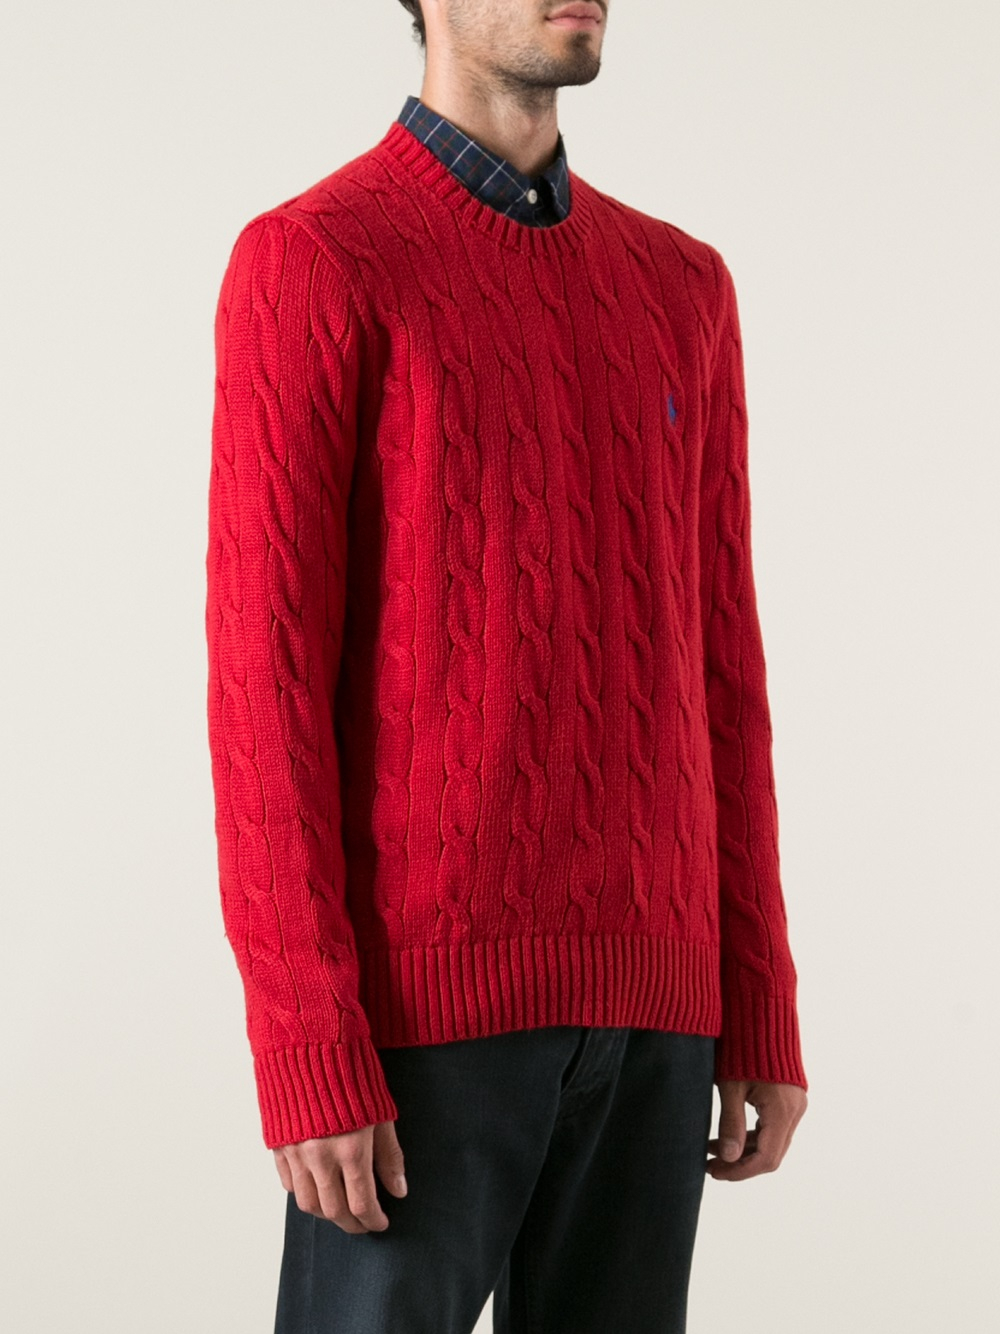 Polo Ralph Lauren Cable Knit Sweater in Red for Men - Lyst